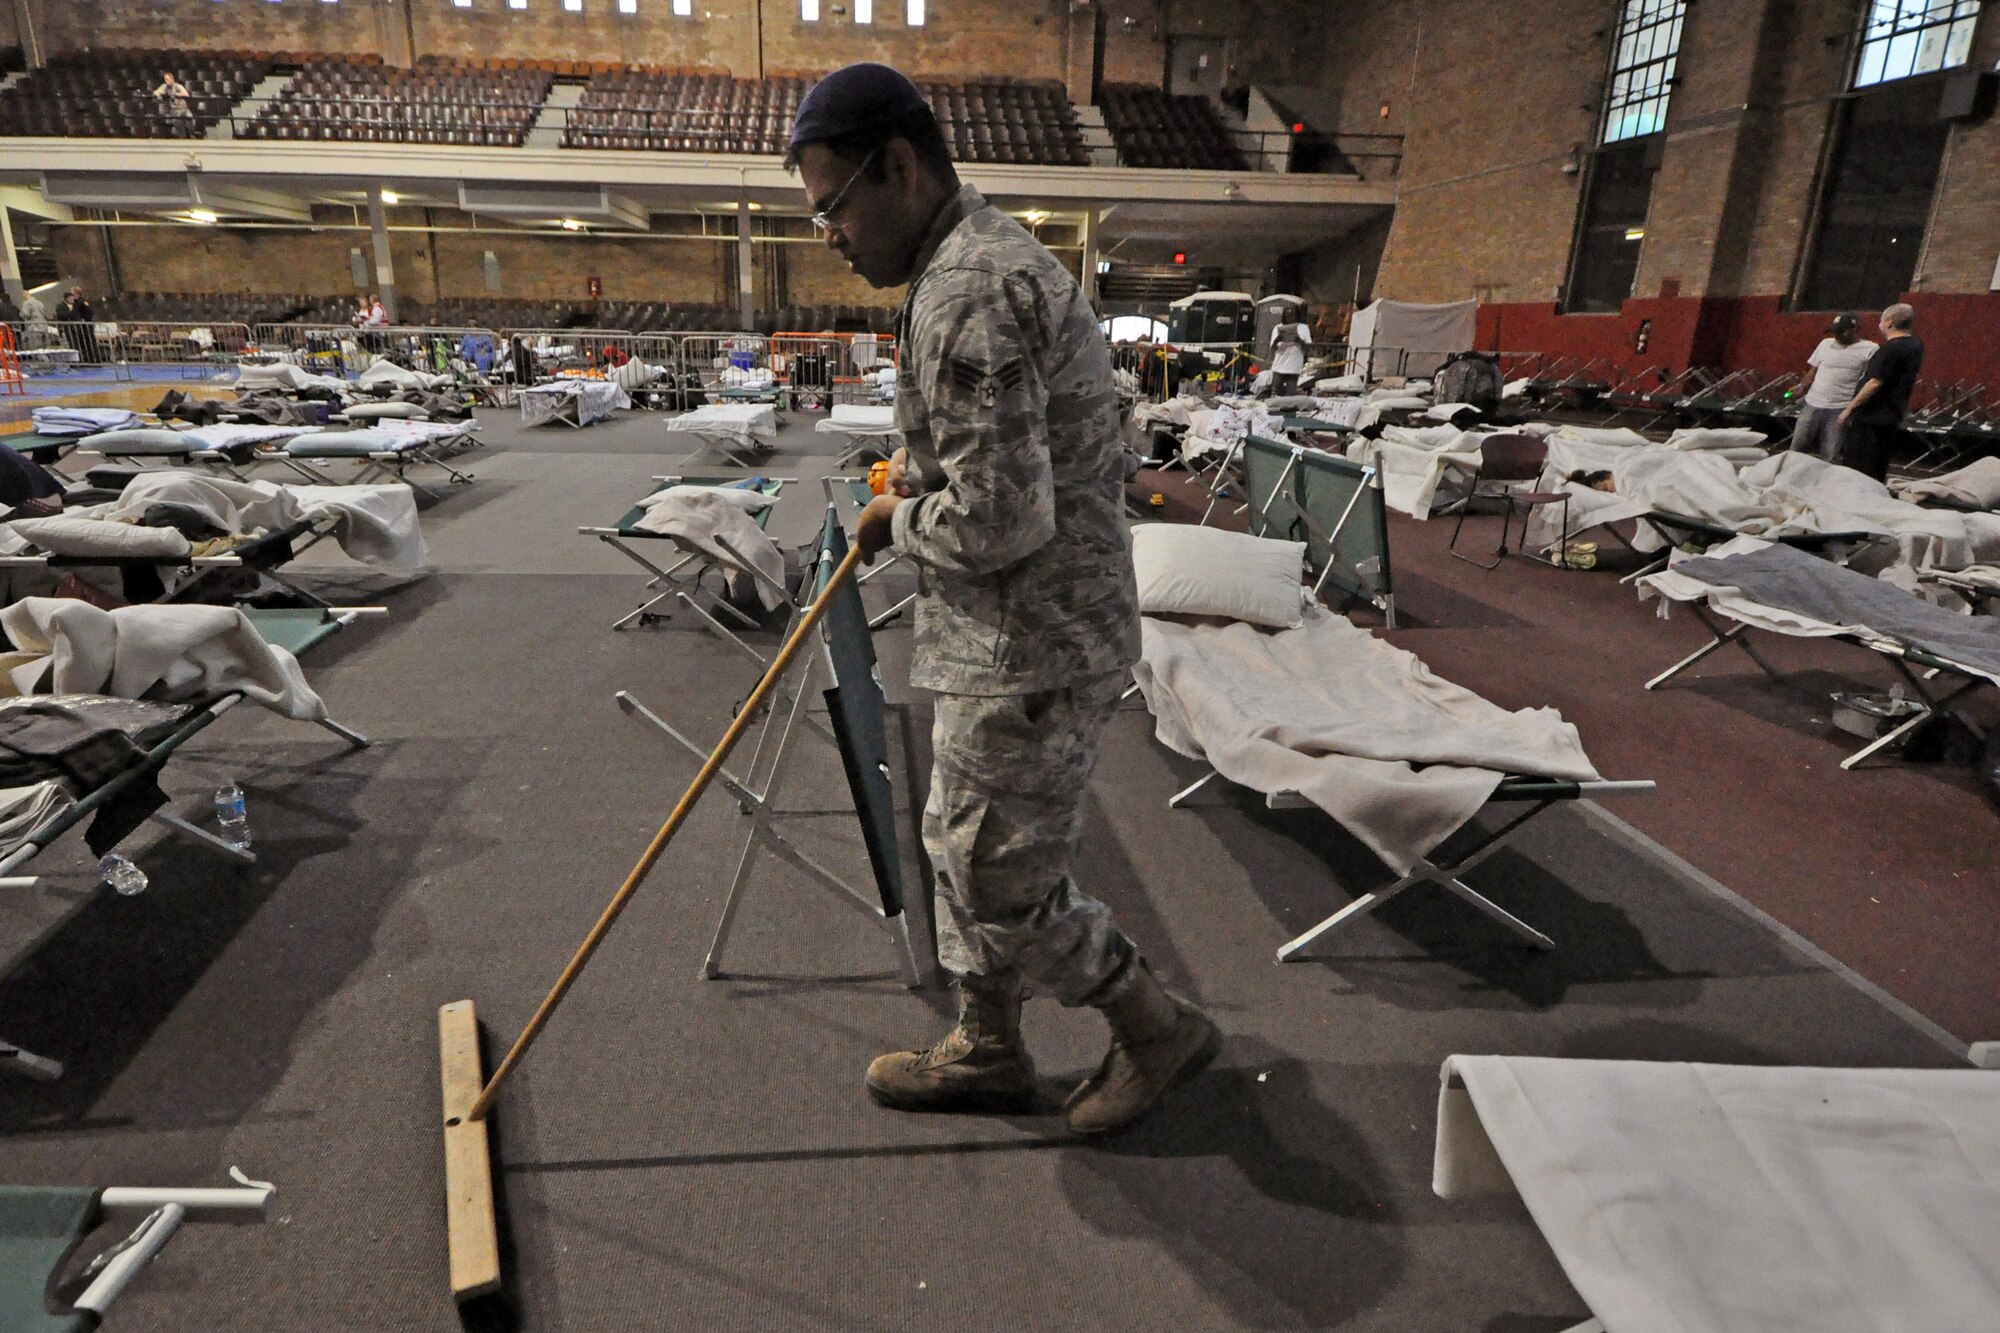 Senior Airman Mohammed Siddiqui, 108th Wing, sweeps the sleeping area for displaced residents at Jersey City, Nov. 7. The New Jersey National Guard is providing sheltering for displaced Jersey City residents at the Jersey City armory. (U.S. Air Force photo by Staff Sgt. Armando Vasquez/Released)